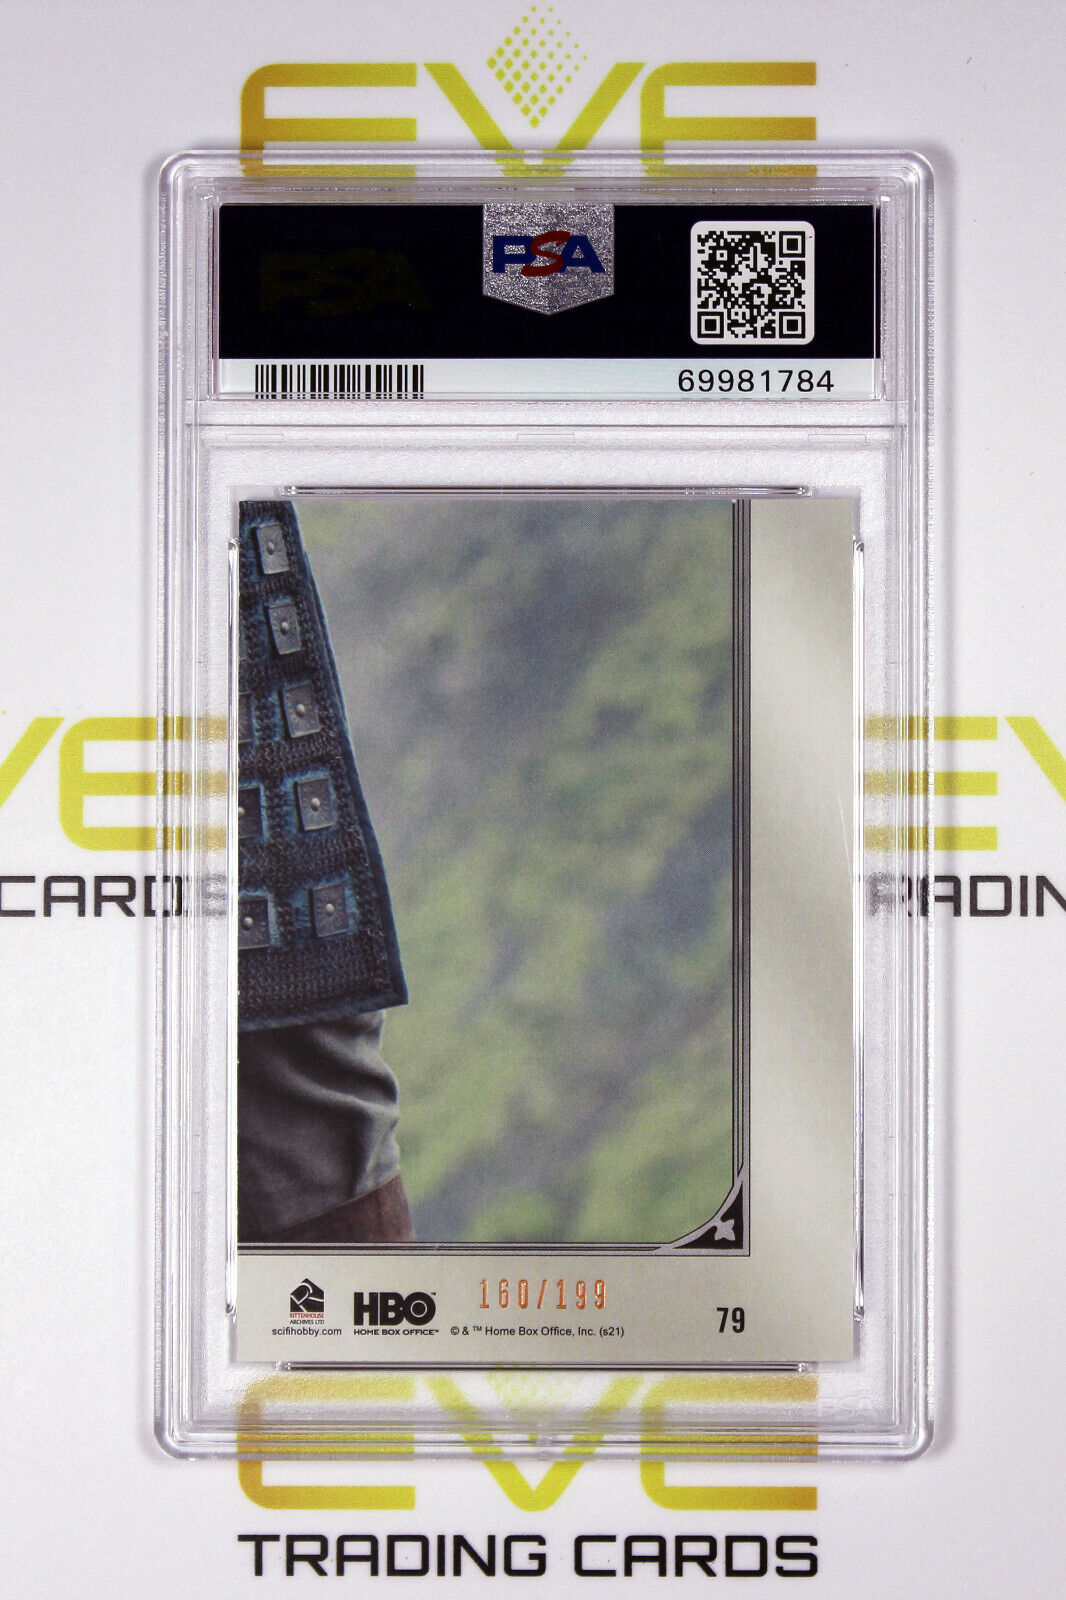 Graded Game of Thrones Card - #79 2021 Brienne of Tarth - Copper /199 - PSA 9